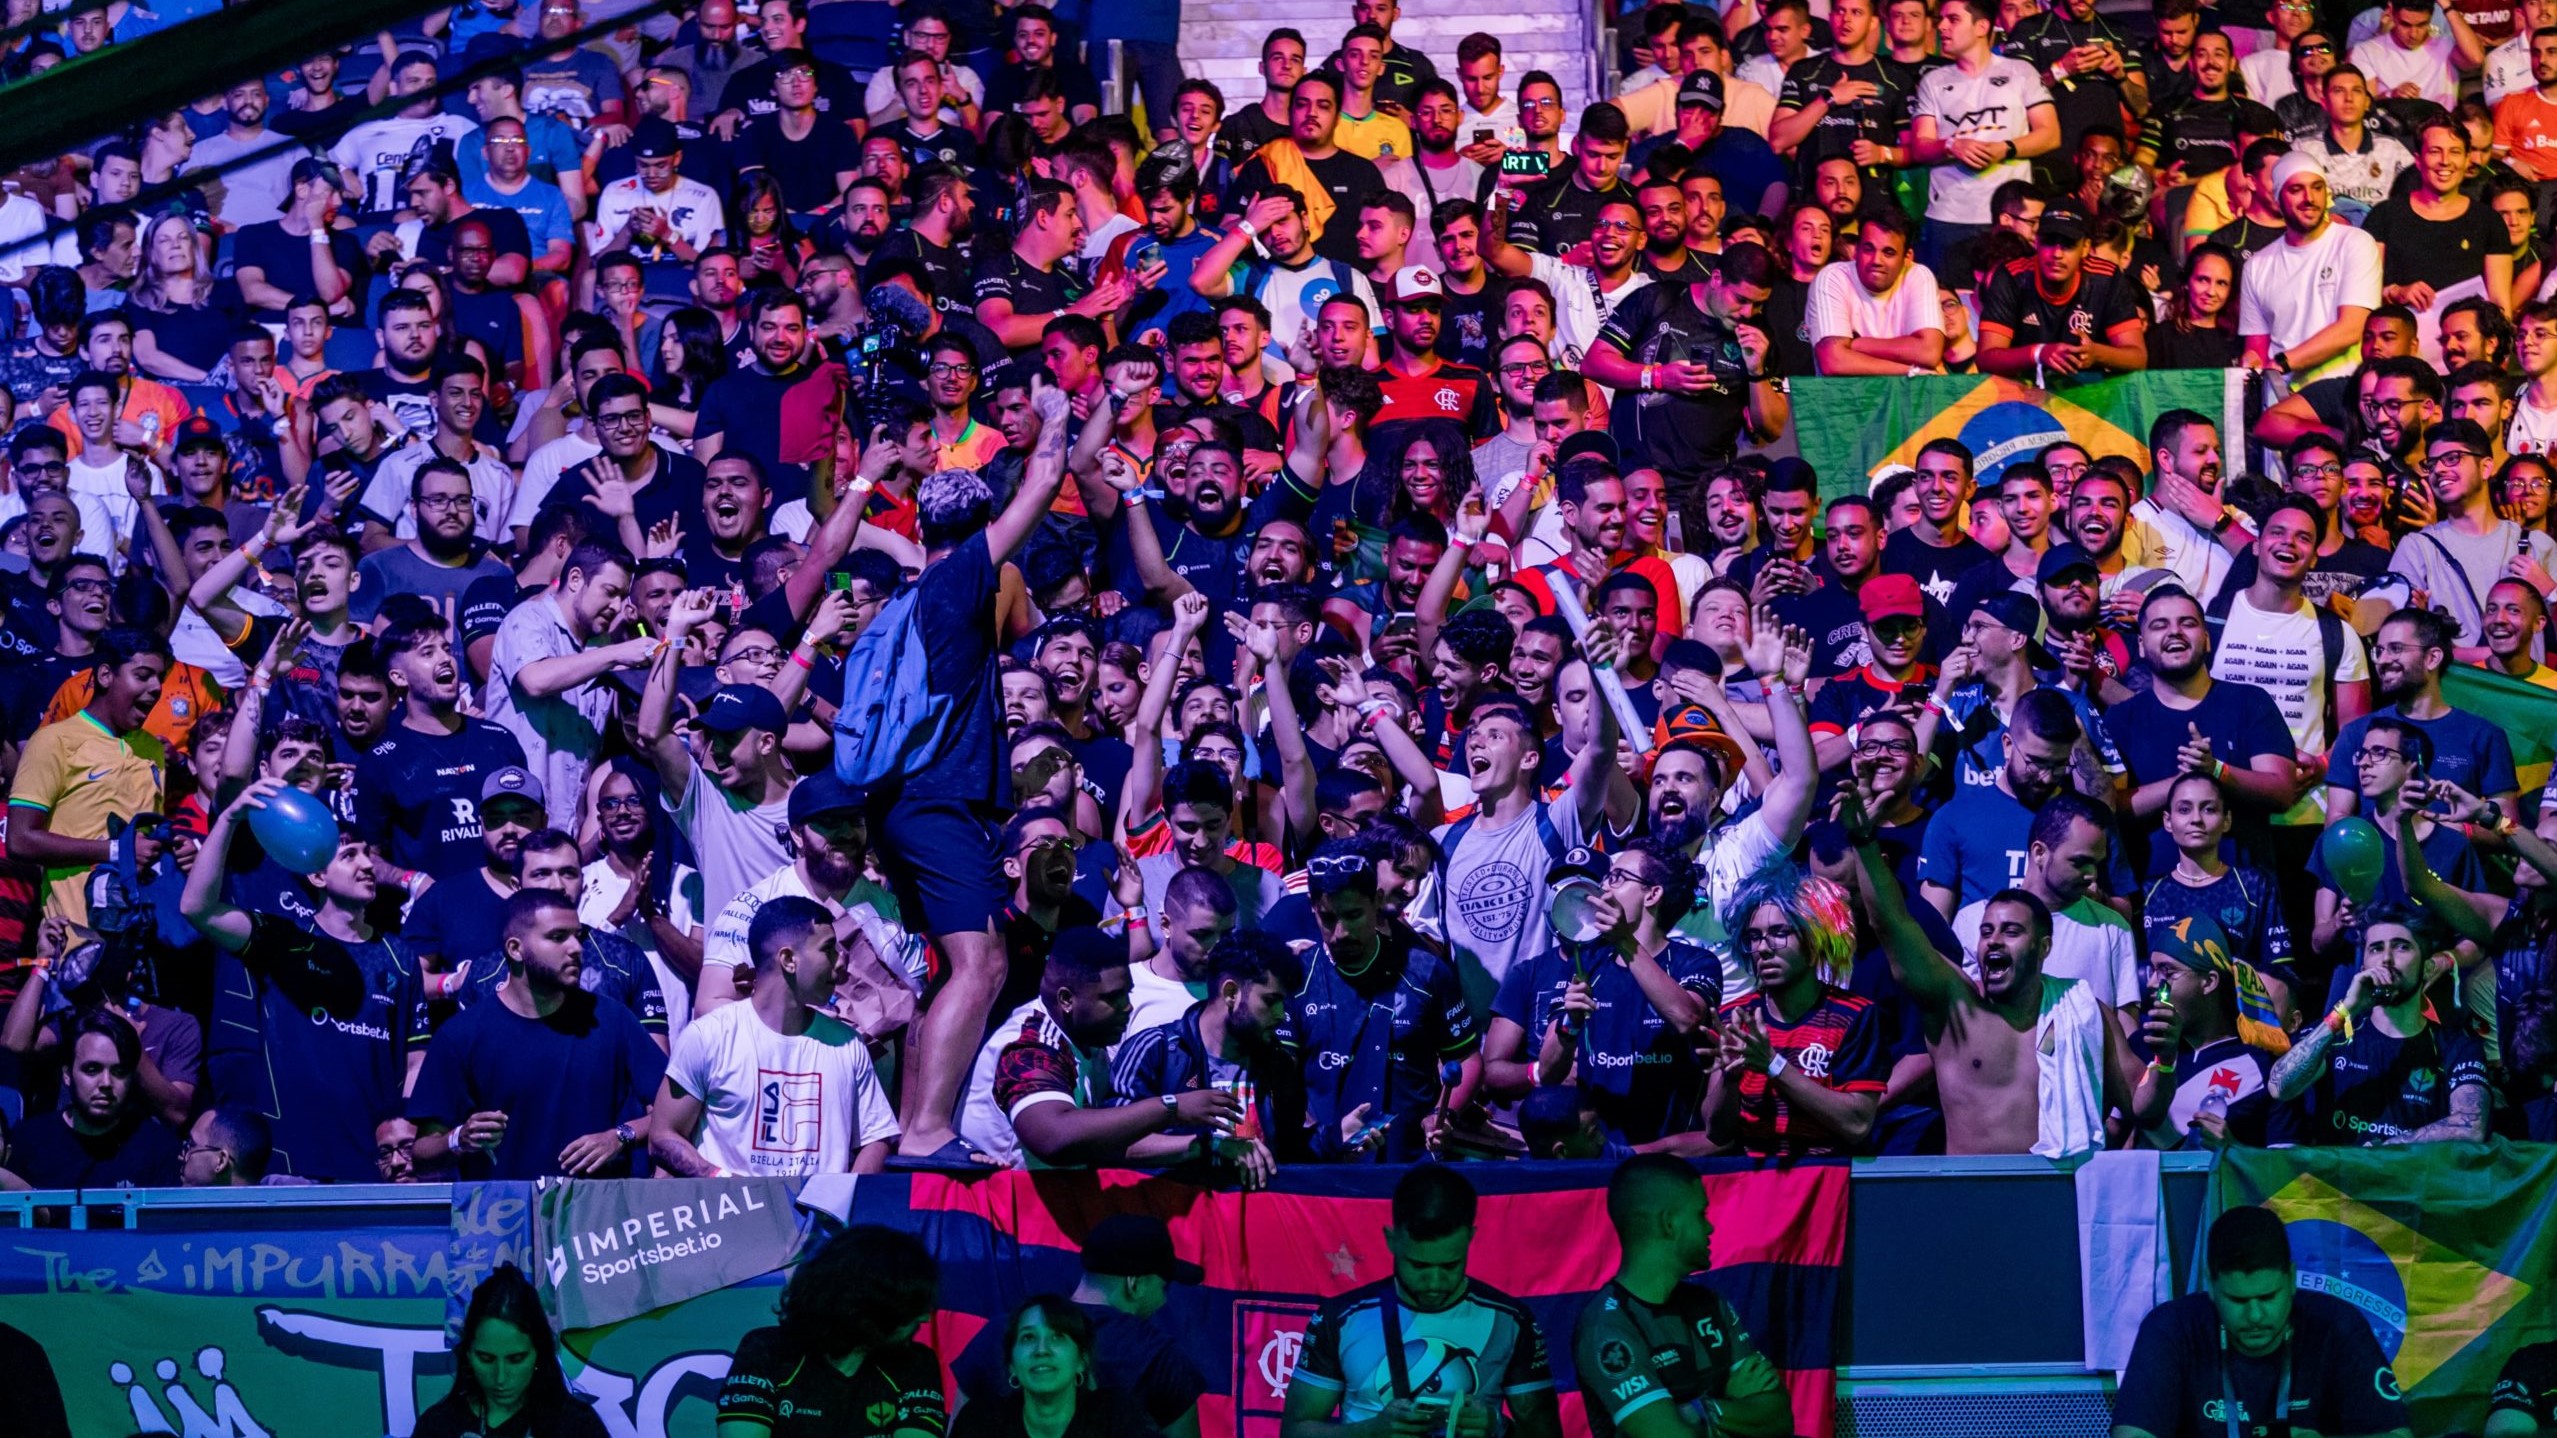 IEM Rio CS:GO Major venue looks empty despite being sold out. Where is the crowd? - Dot Esports